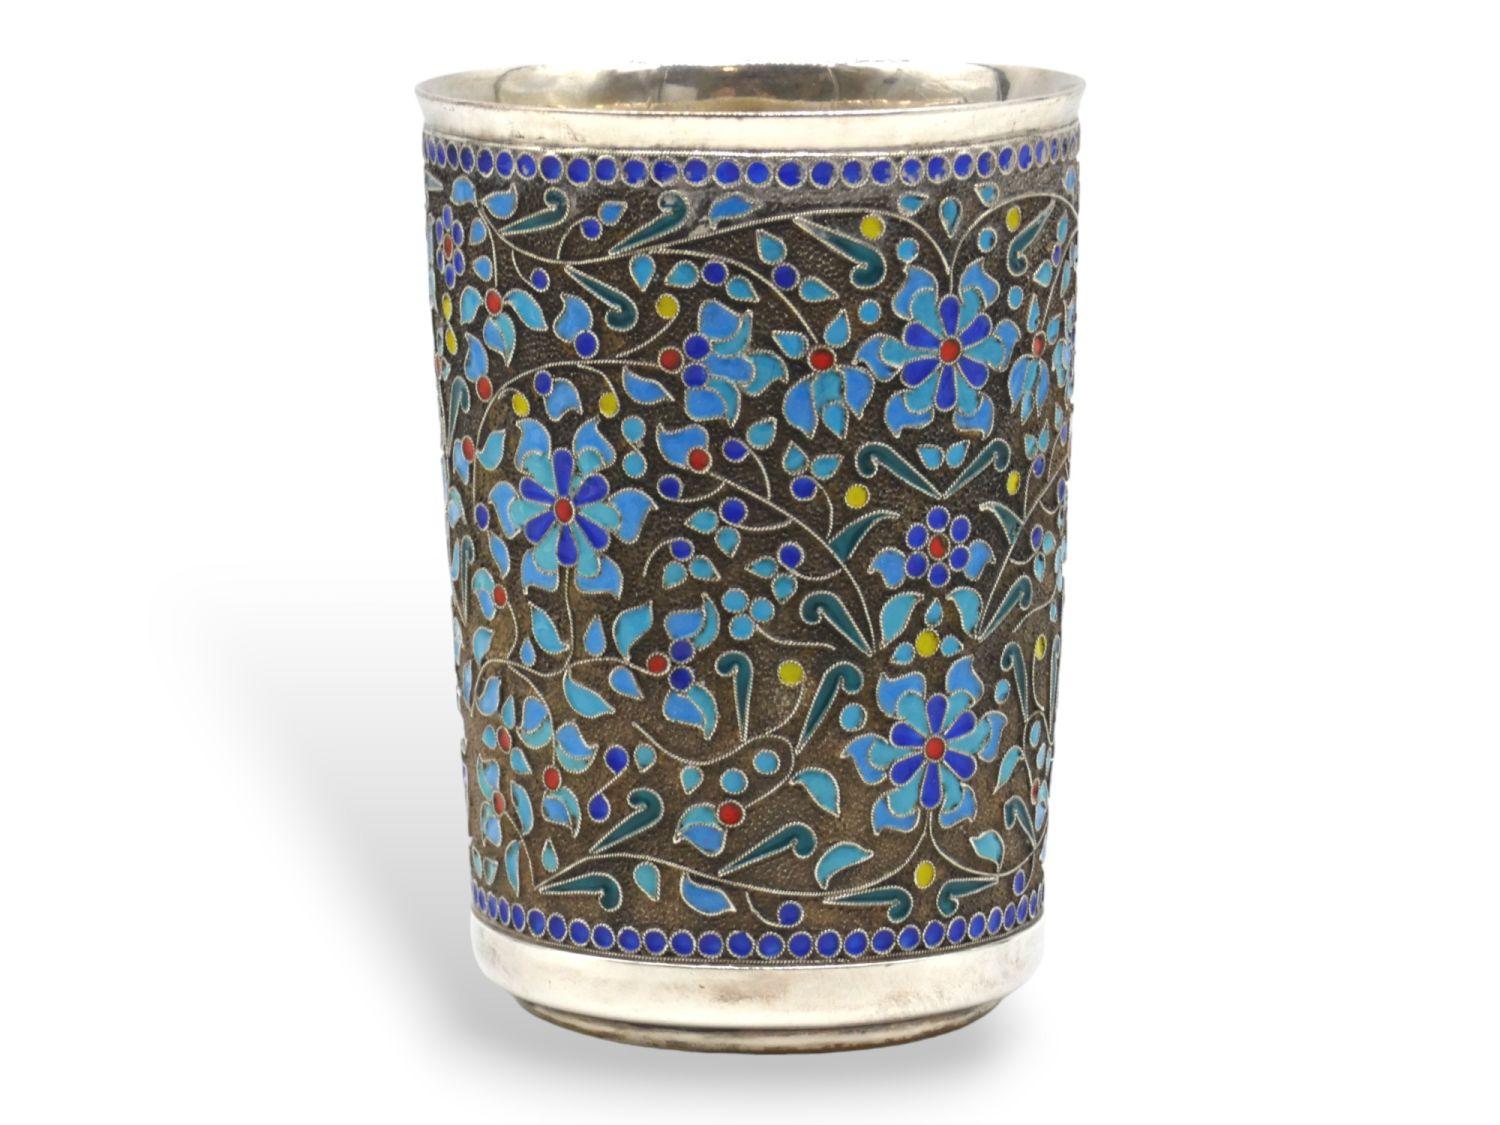 A Silver and Enamel Passover Kiddush Cup by Henryk Winograd, New York, 1995 For Sale 1